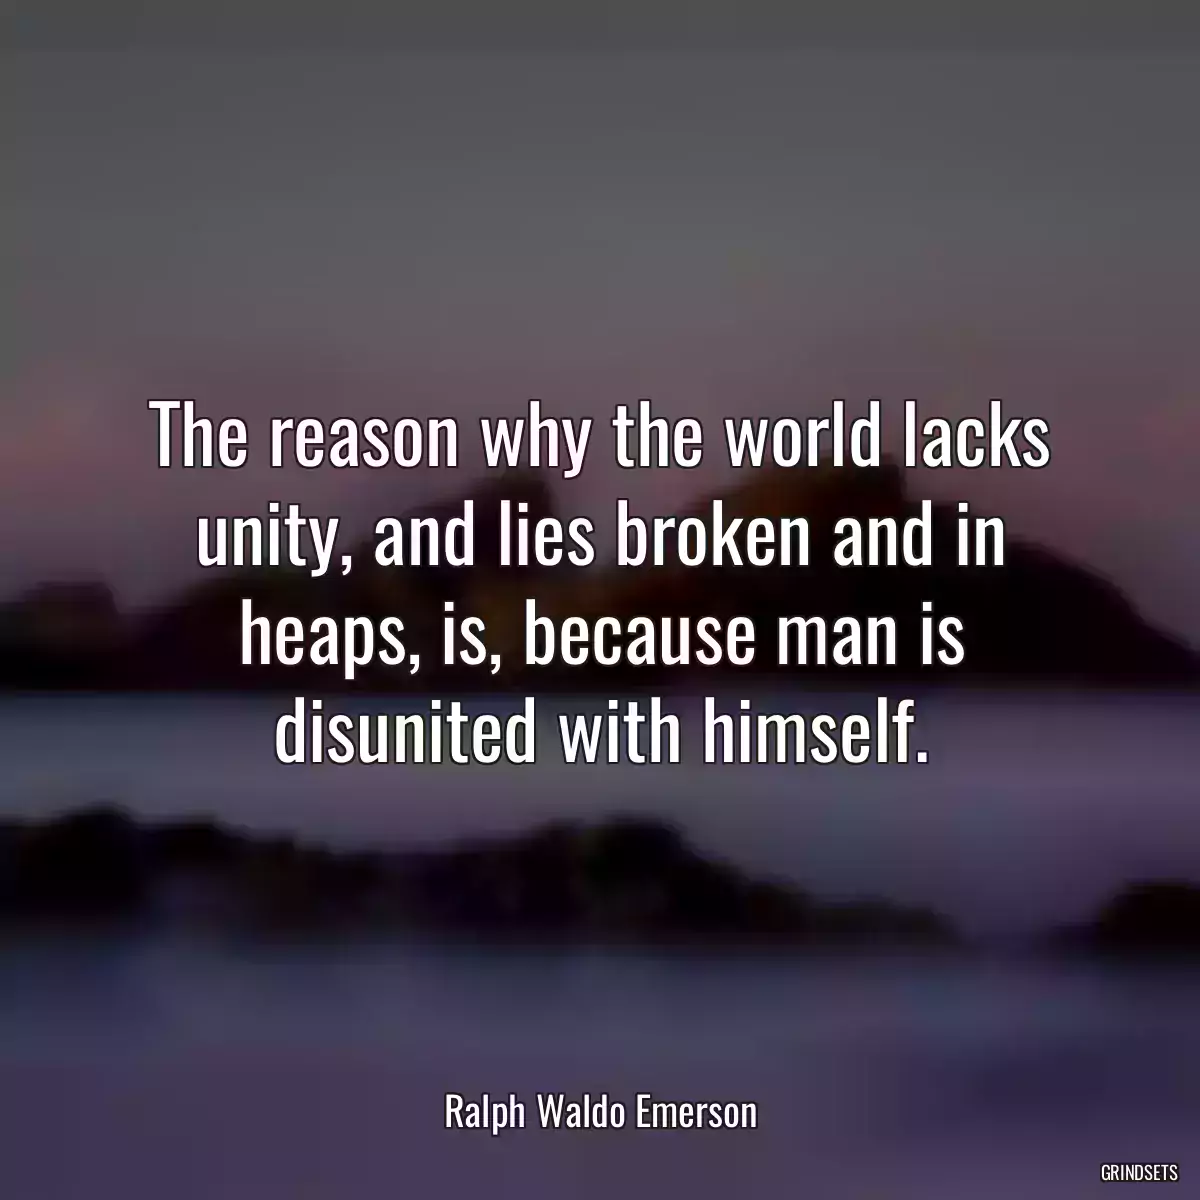 The reason why the world lacks unity, and lies broken and in heaps, is, because man is disunited with himself.